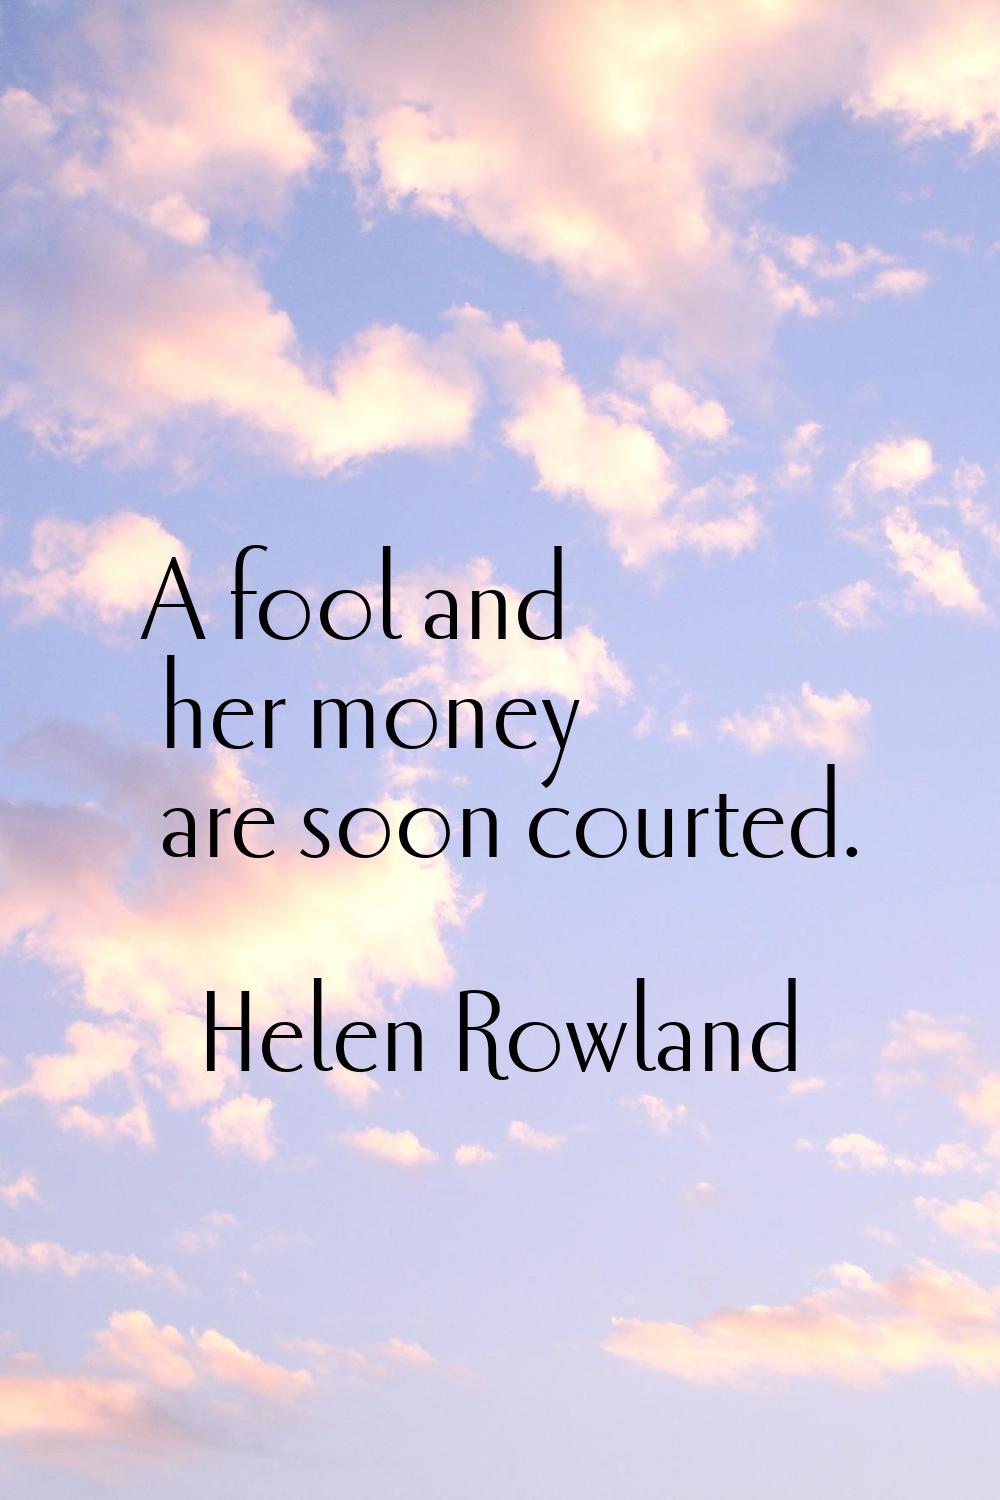 A fool and her money are soon courted.